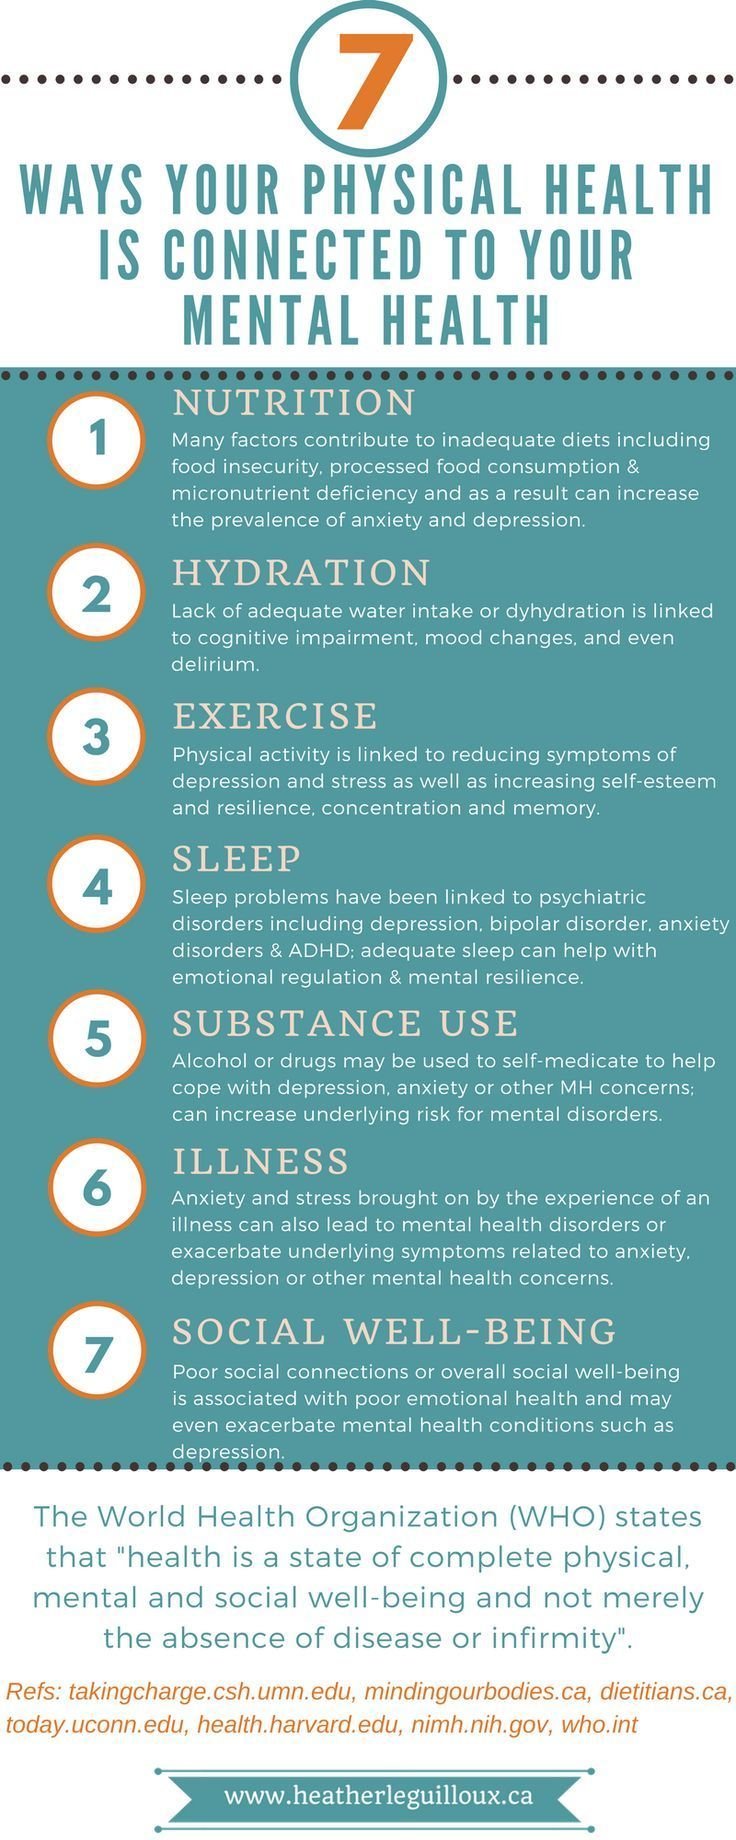 Ways your physical health is connected to your mental health